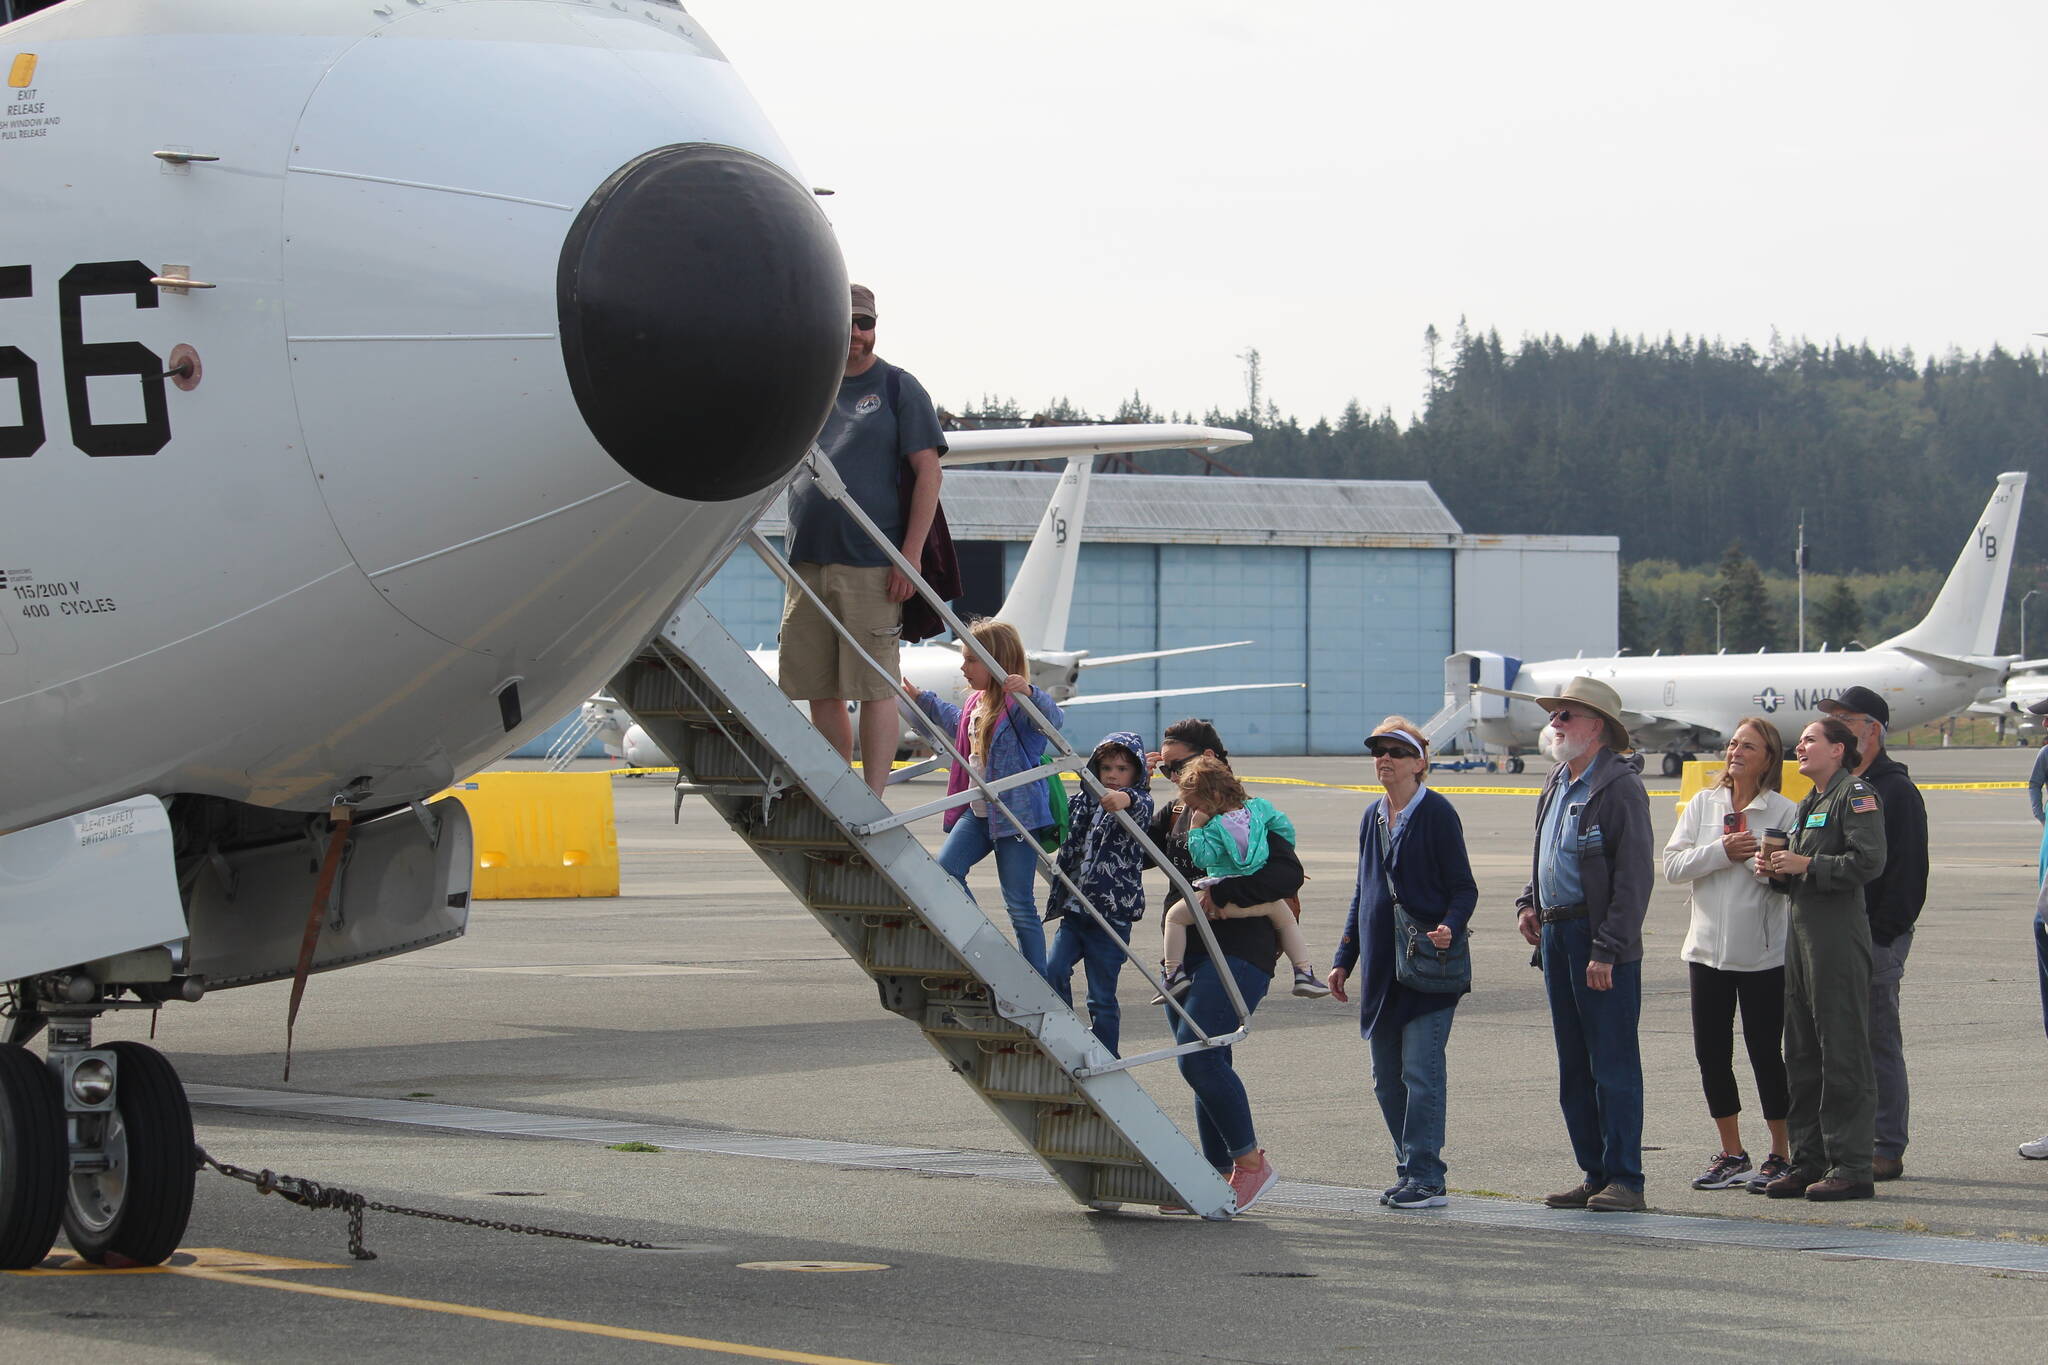 Photo by Karina Andrew/Whidbey News-Times
Families wait in line to tour a Navy aircraft.